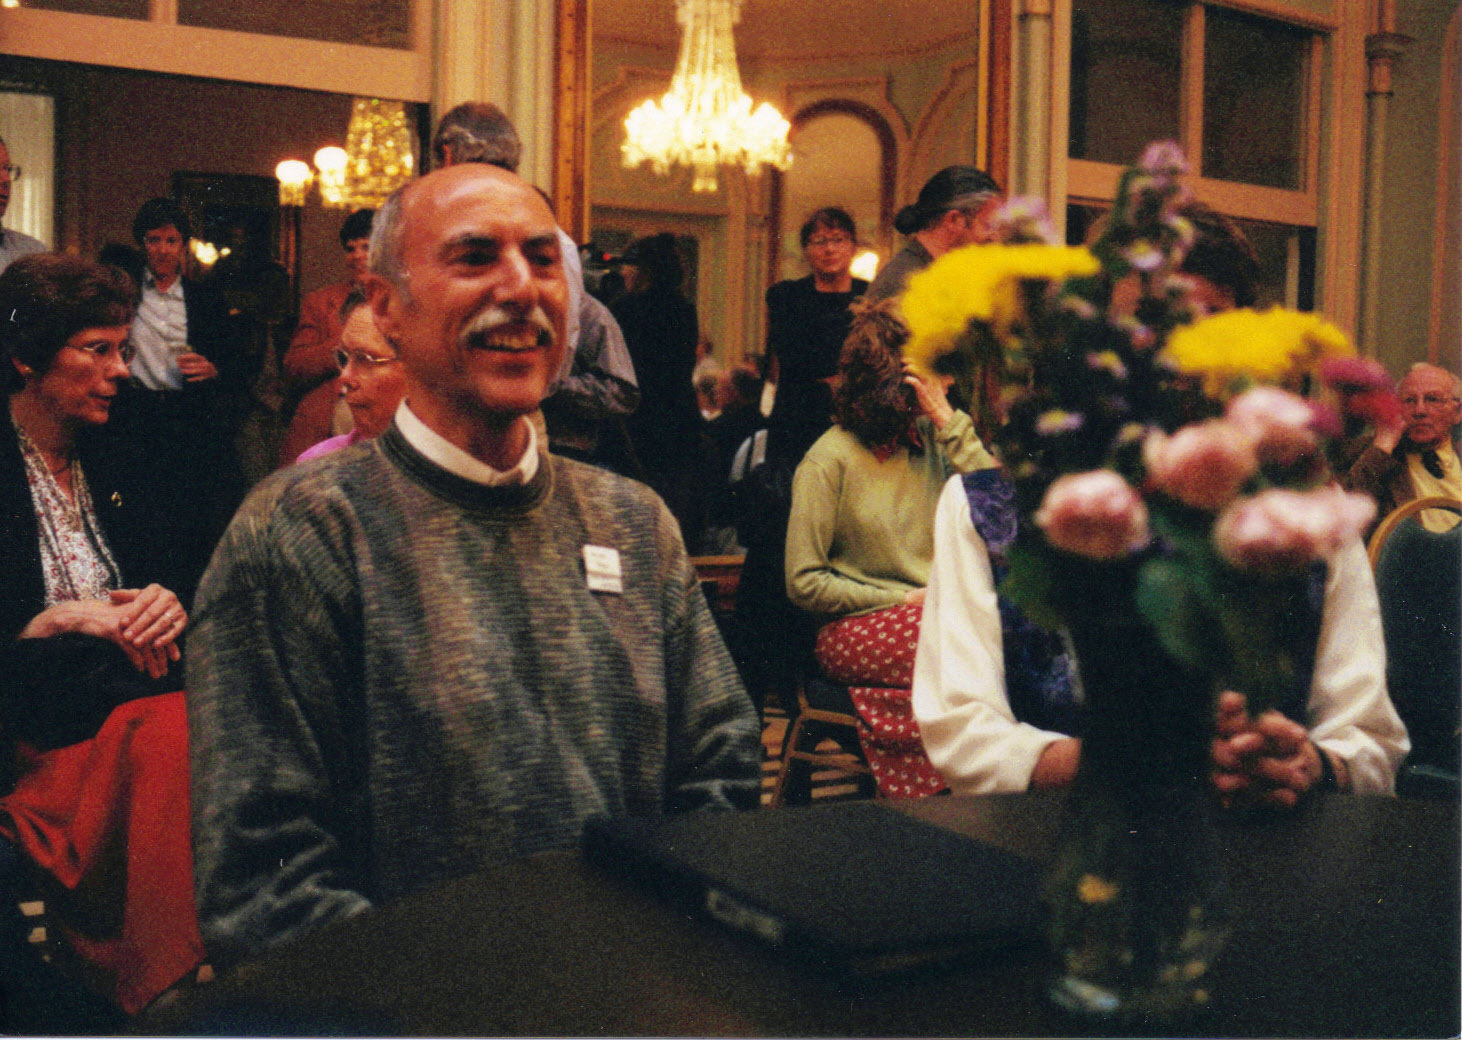 Denis at his retirement party